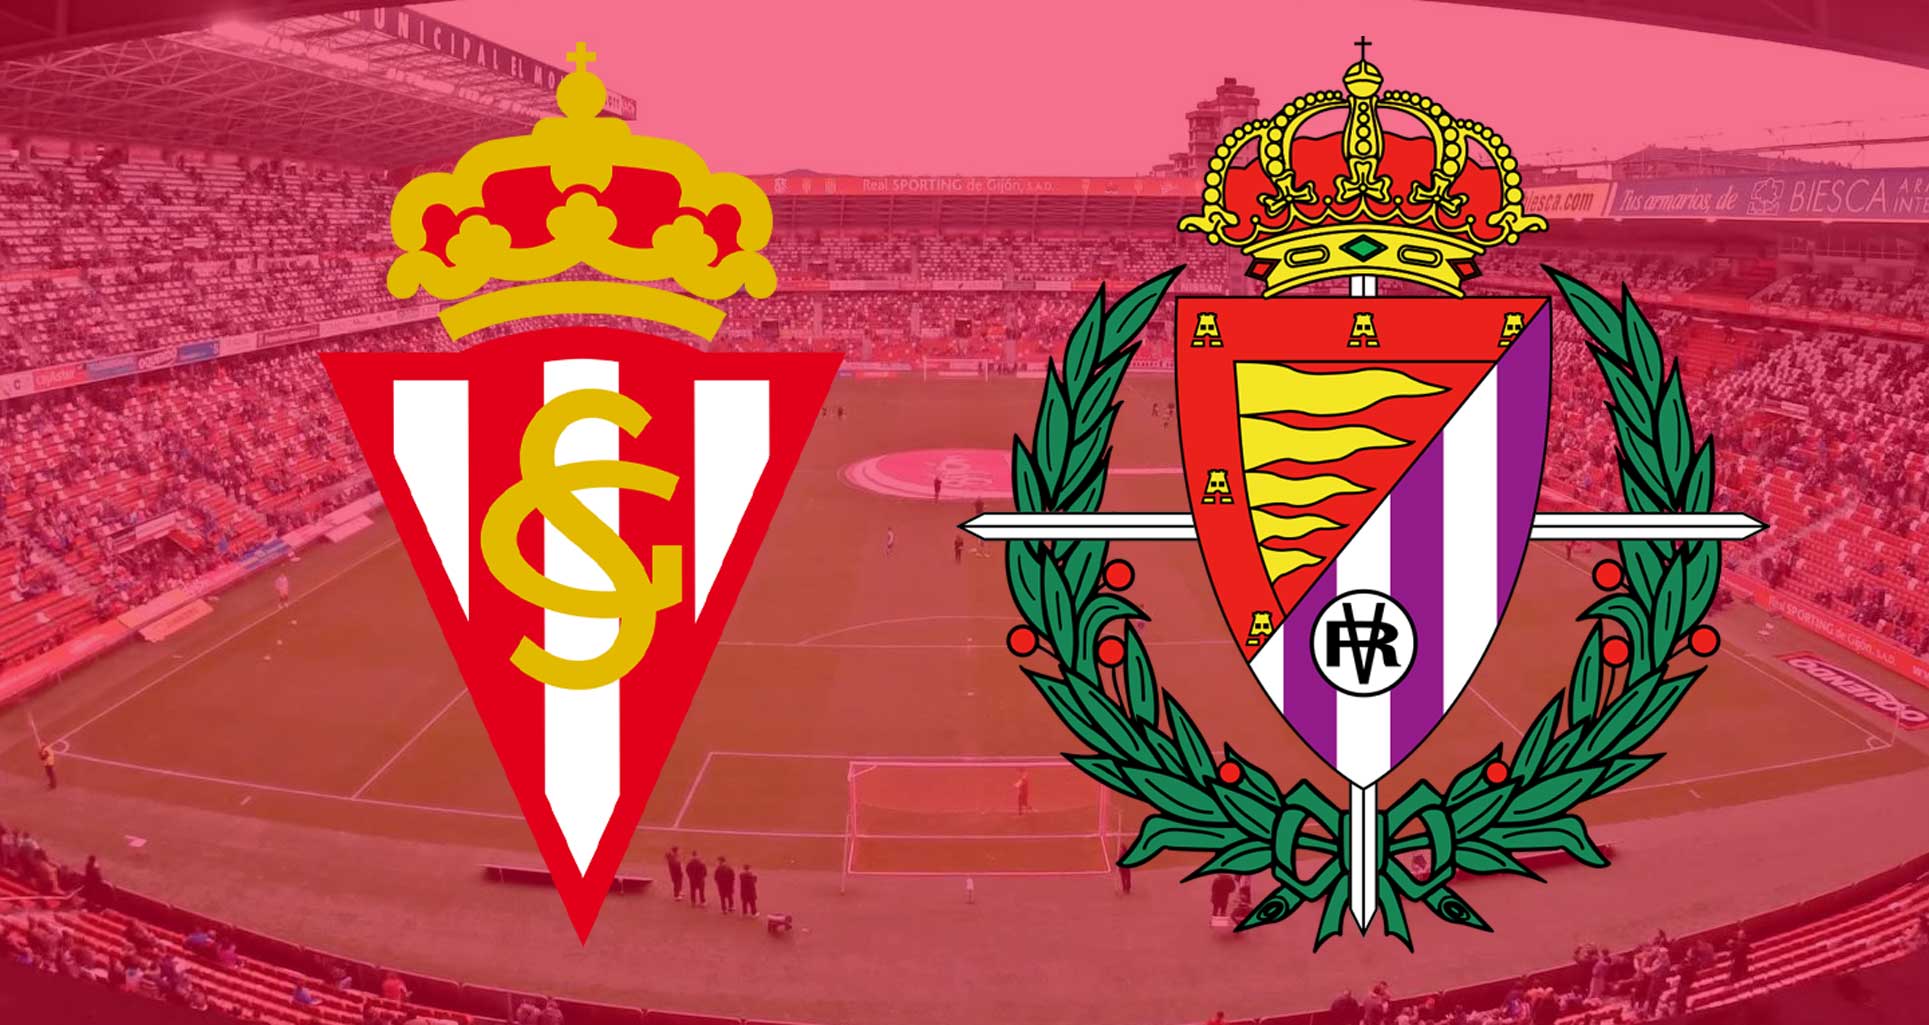 ⏱️ Minuto a minuto Play Off de Ascenso | Real Sporting - Real Valladolid Sporting1905